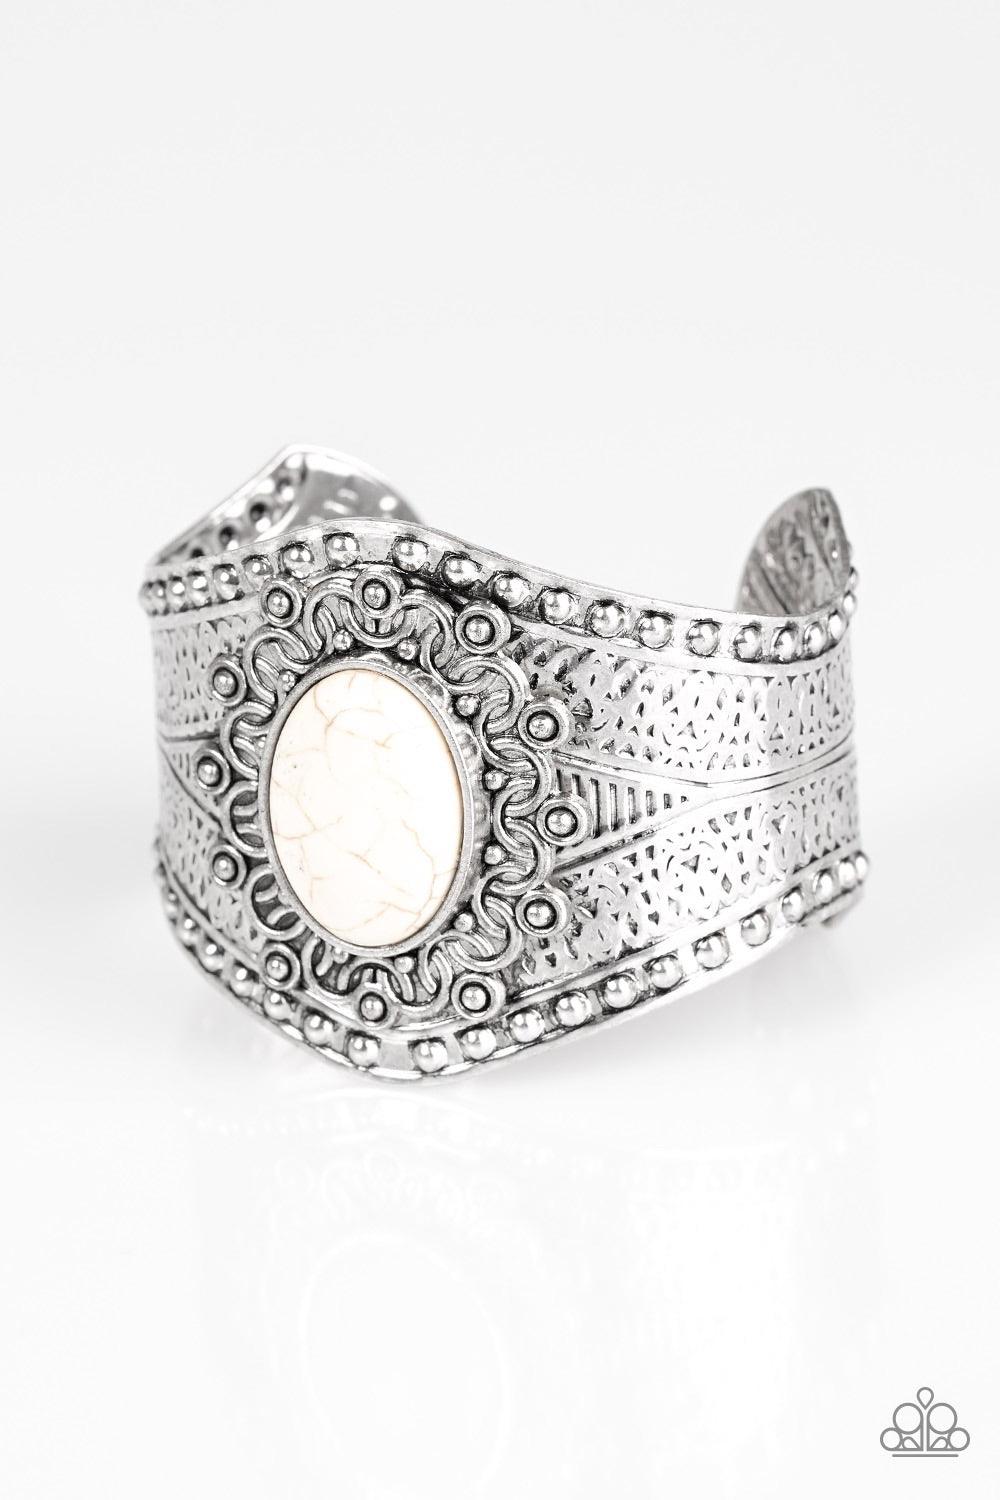 Paparazzi Accessories Majave Majesty - White Delicately hammered and studded in tribal inspired textures, a thick silver cuff wraps around the wrist in an artisan inspired fashion. A smooth white stone is pressed into the middle of a silver sunburst patte